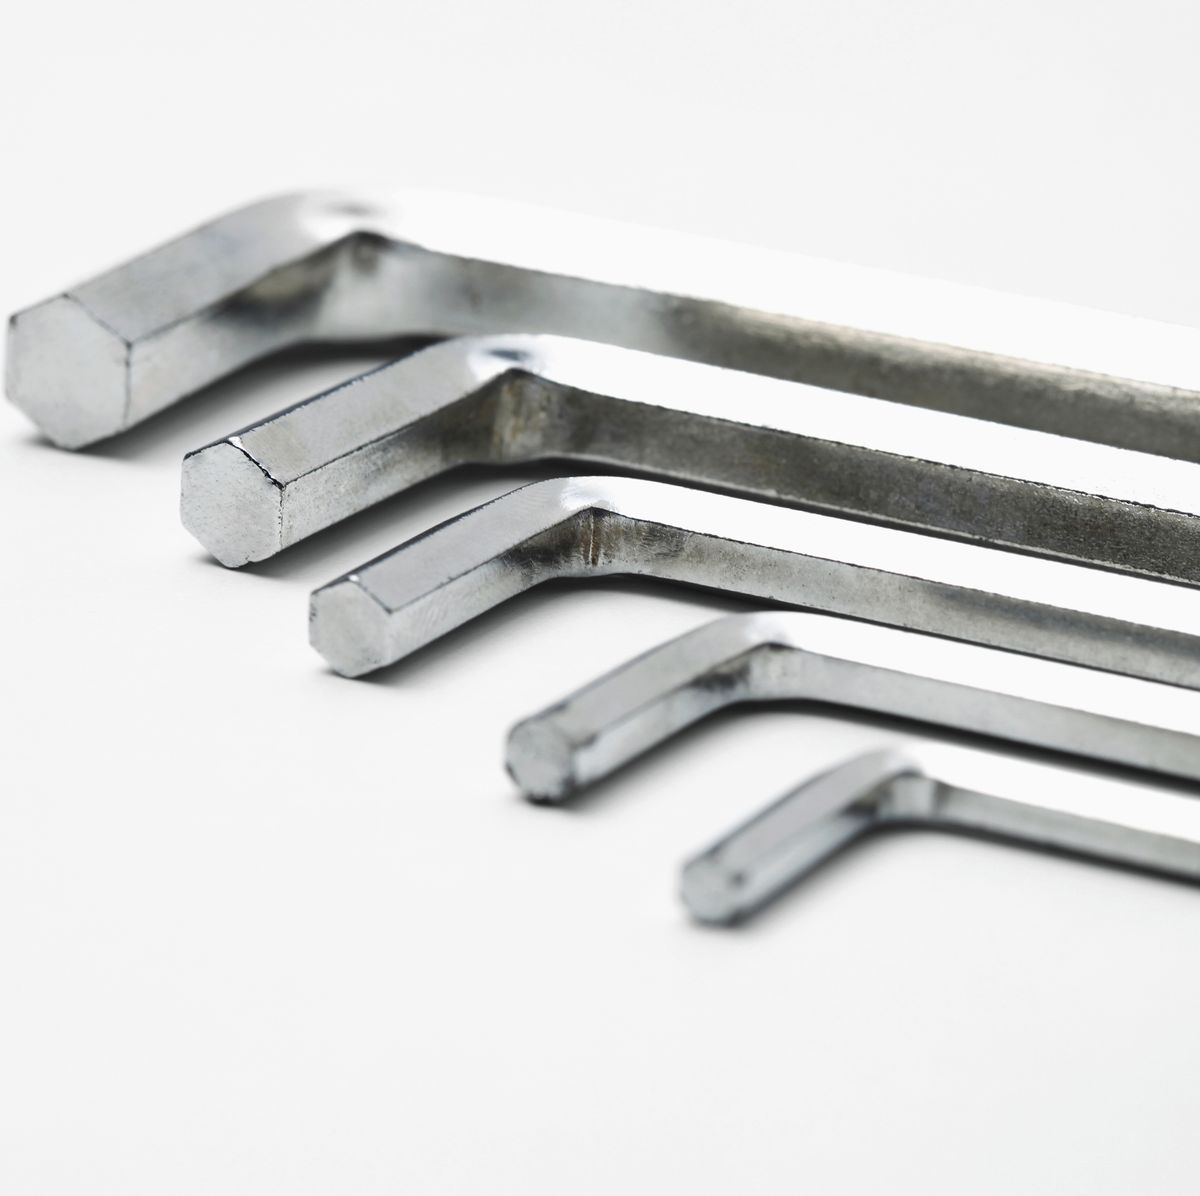 How to Buy the Right Allen Wrench Set (Because You Need One